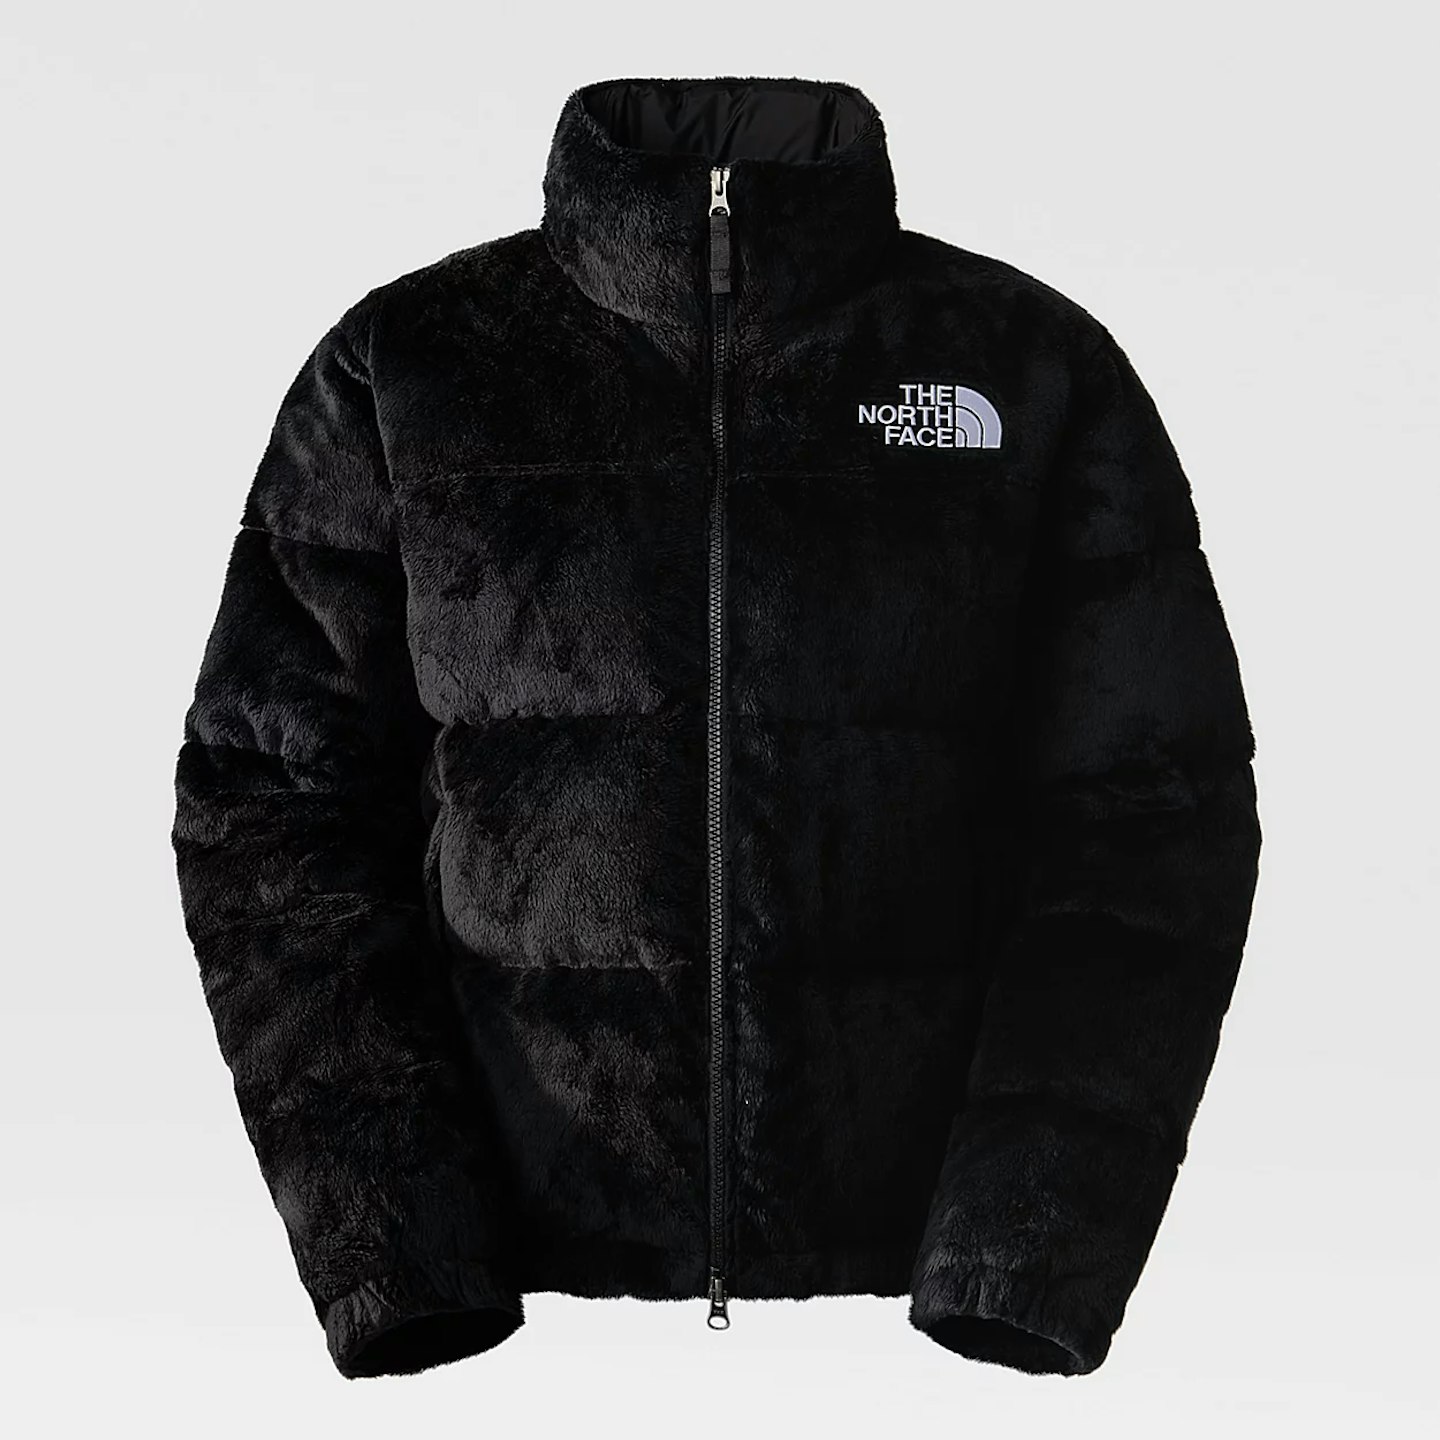 Win Winter Thanks To Black Friday Weekend At The North Face